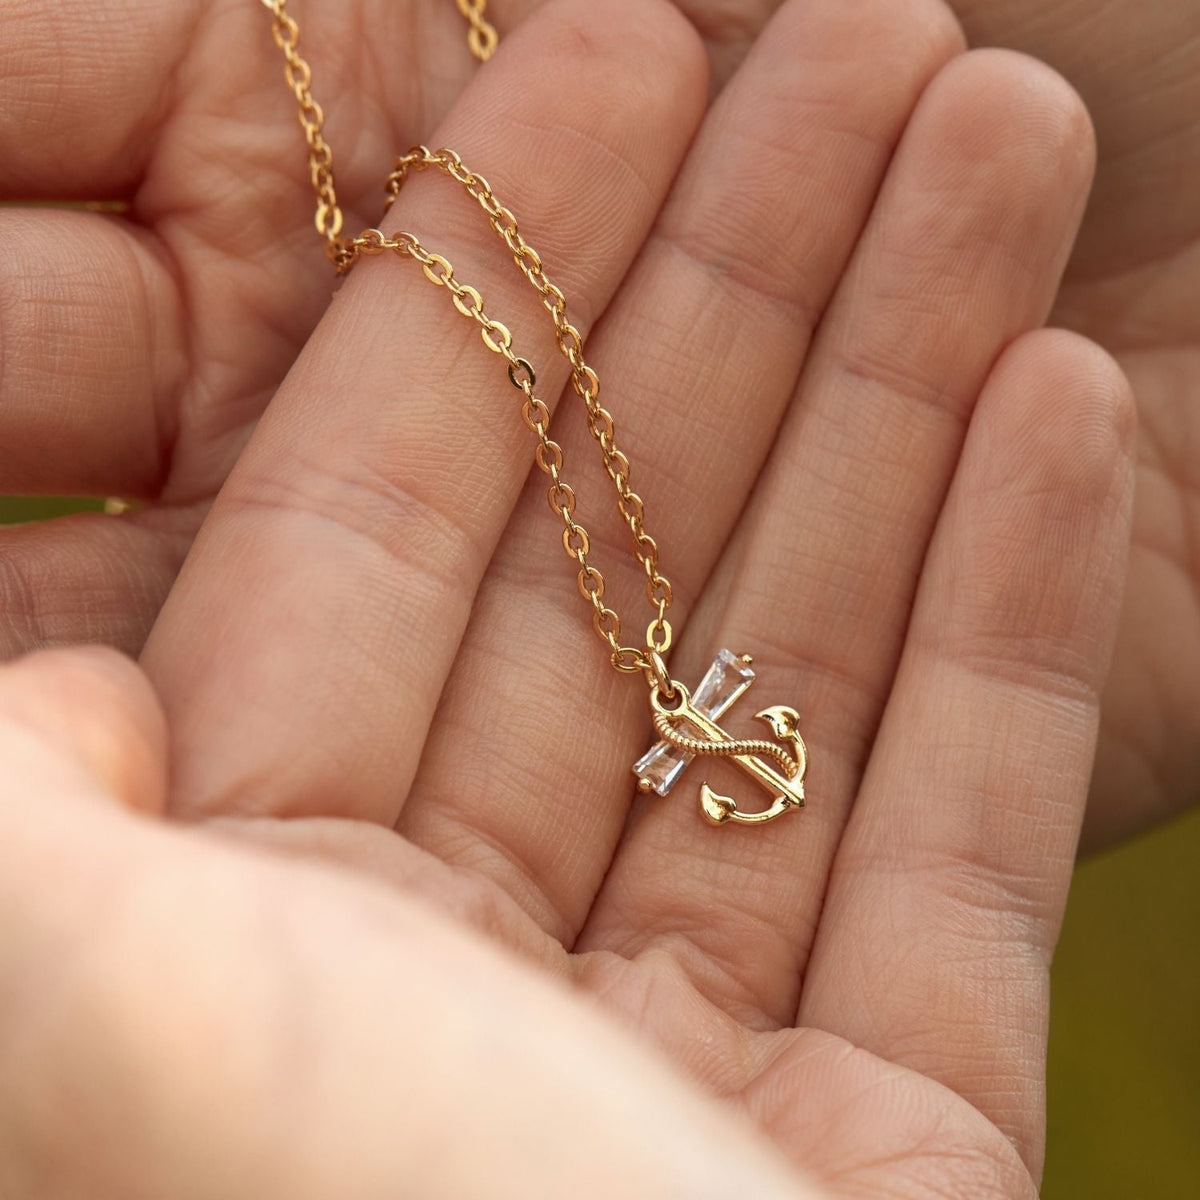 To My Bonus Daughter | Family Isn&#39;t Always Blood | Anchor Necklace